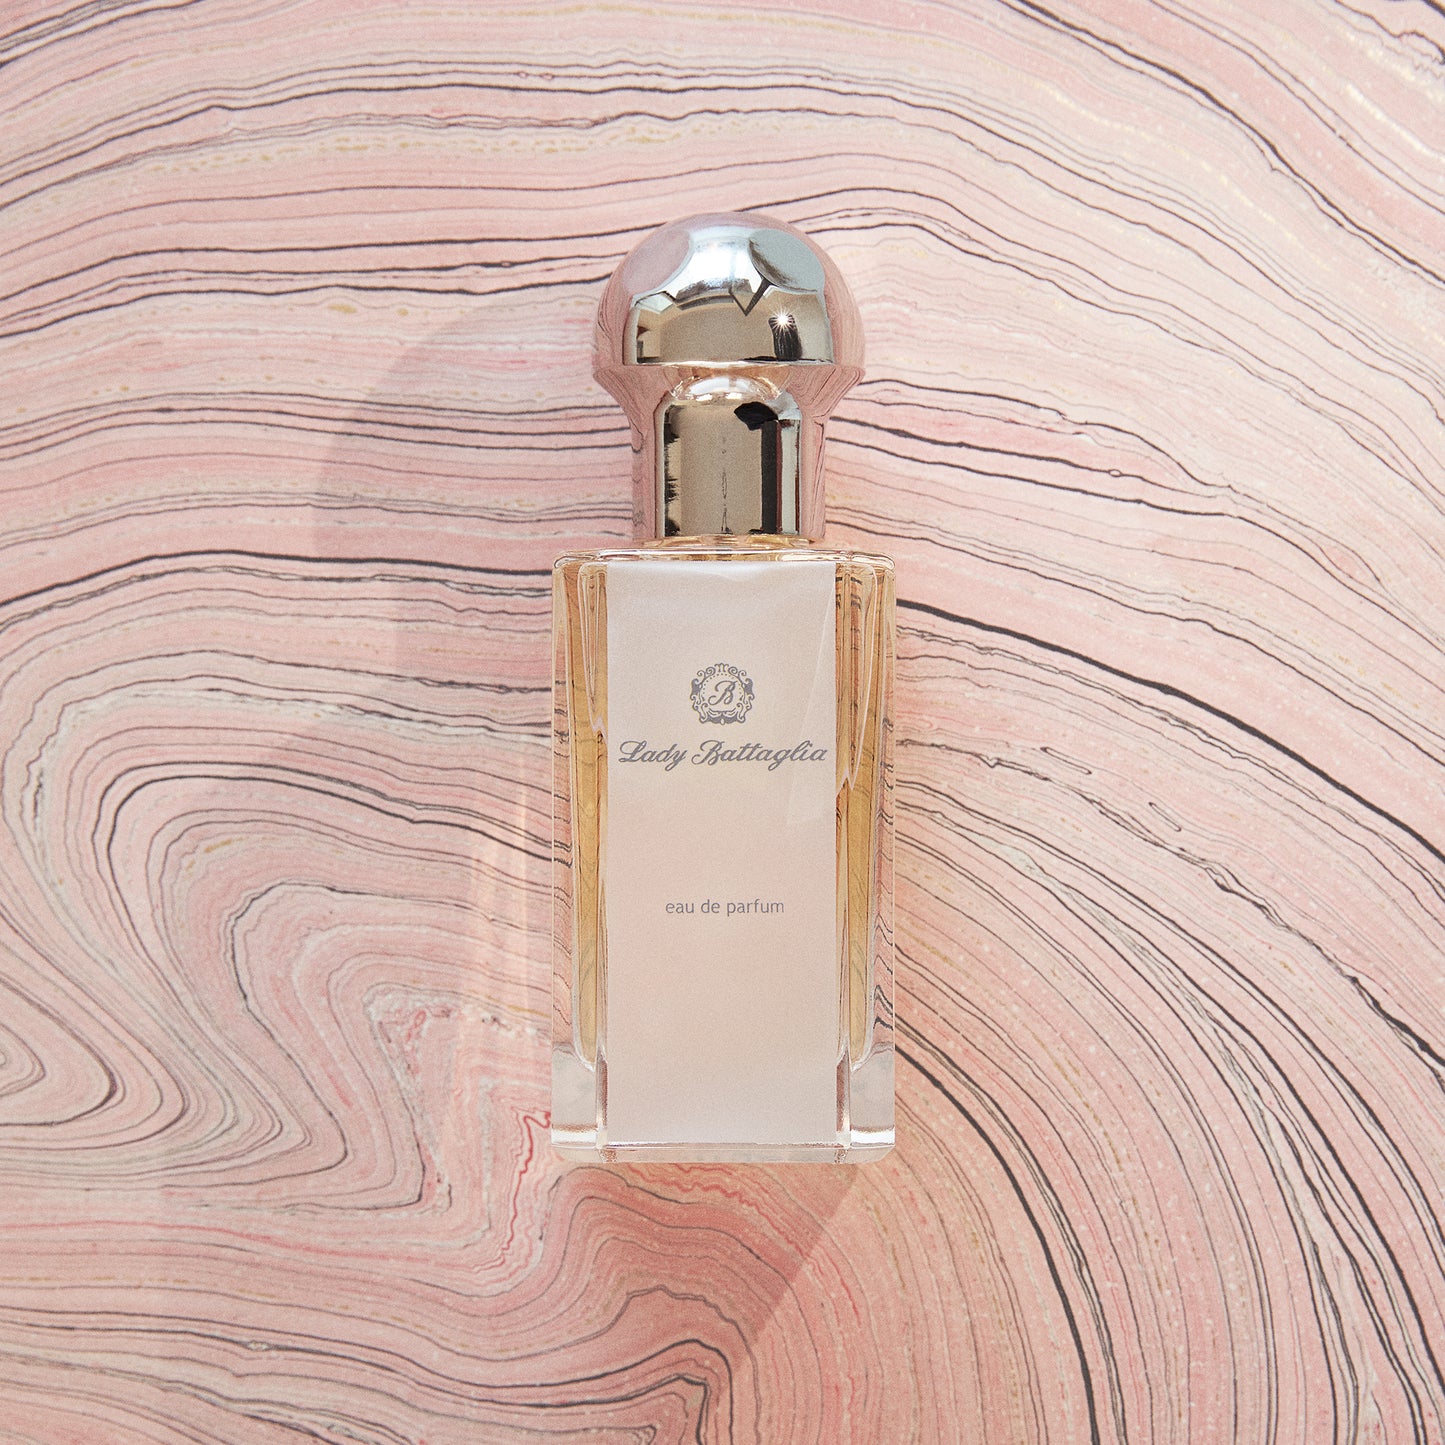 A photo of the Lady Battaglia fragrance by Battaglia against a pink marbled paper background. The bottle is clear and rectangular with a silver circular top. 